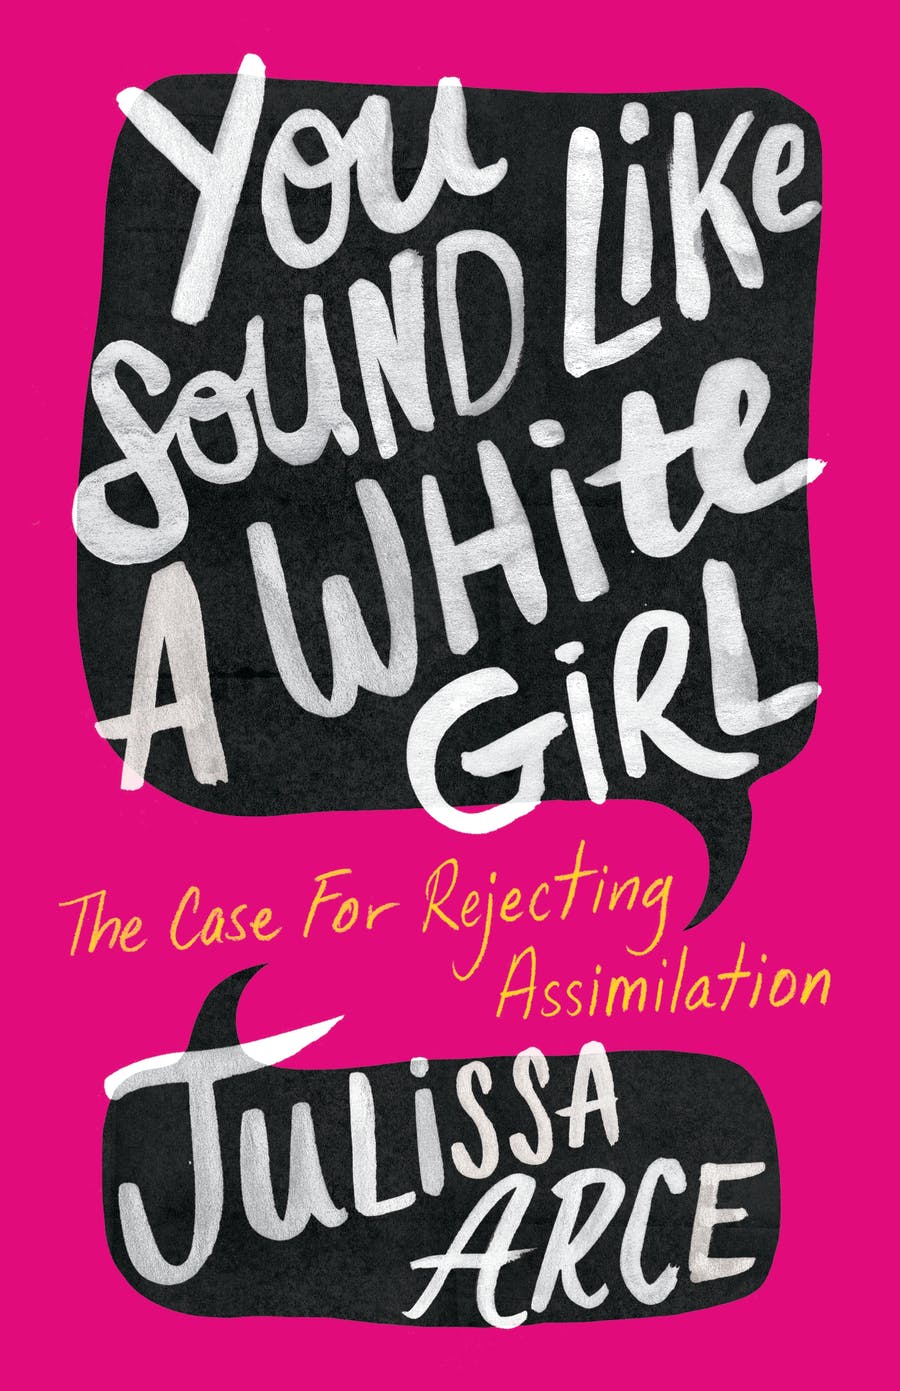 You Sound Like a White Girl: The Case for Rejecting Assimilation by Julissa Arce